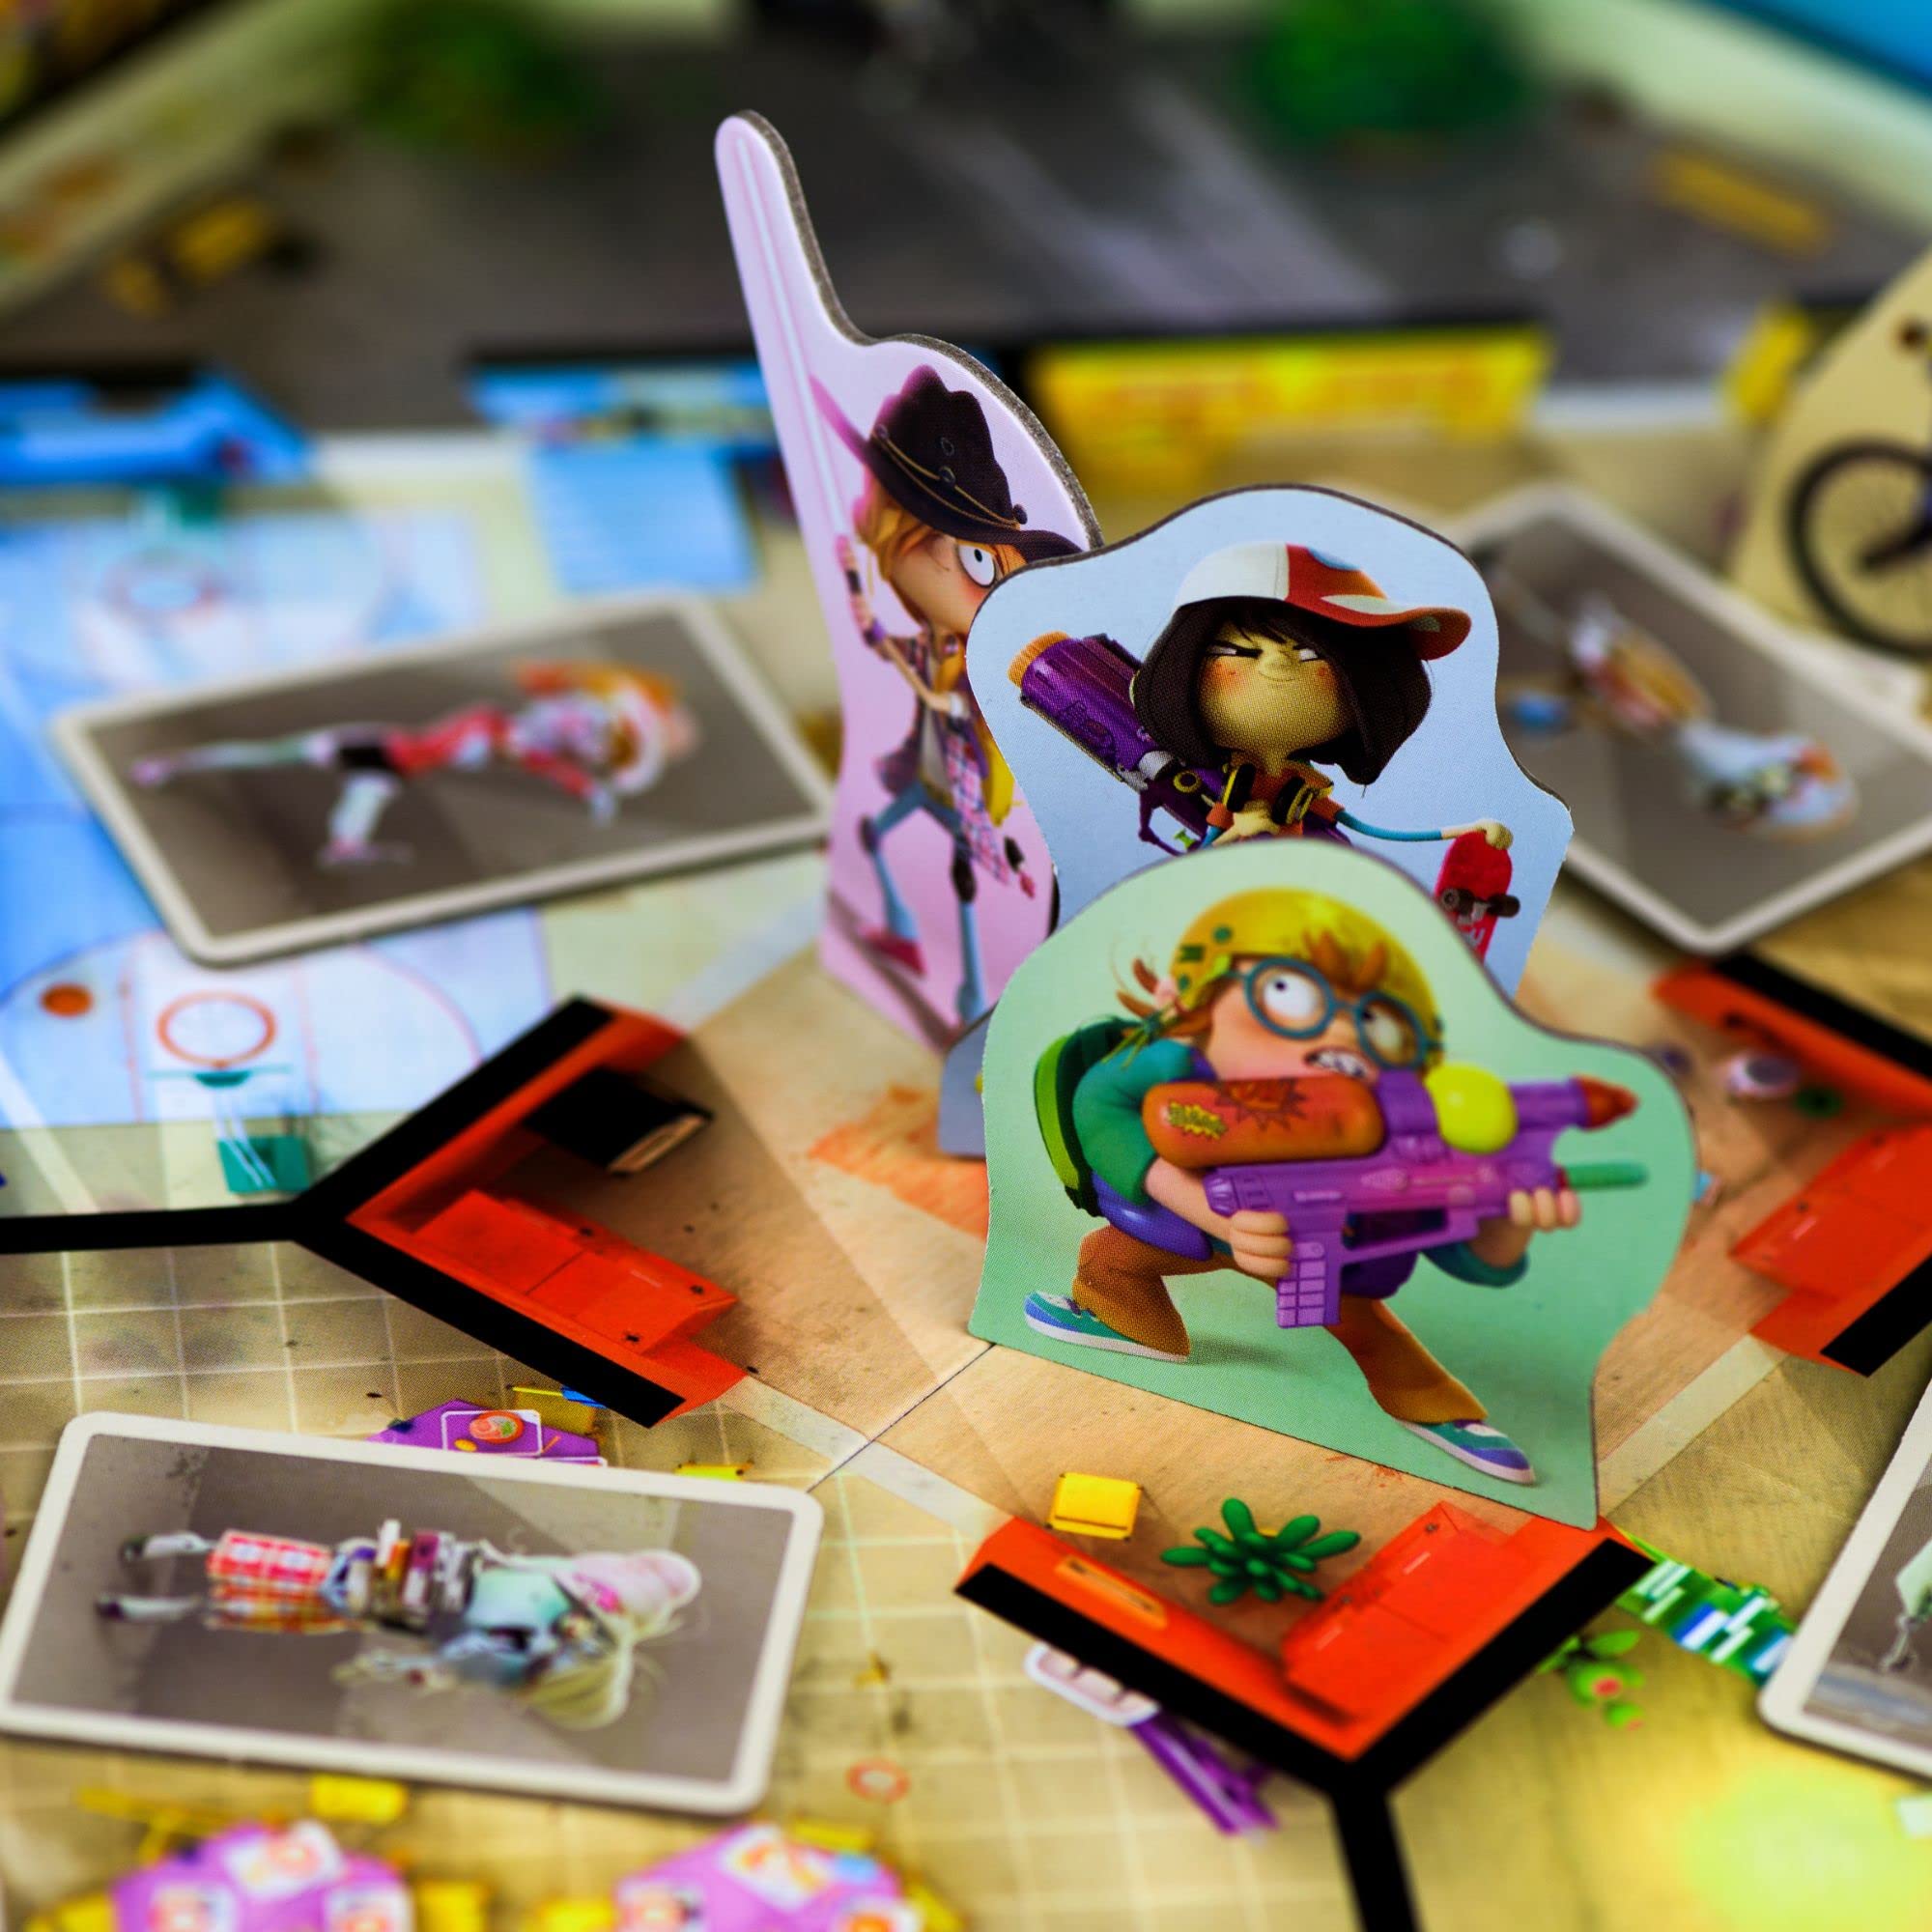 Zombie Kidz Evolution | Cooperative Game for Kids and Families | Ages 7+ | 2 to 4 Players | 15 Minutes